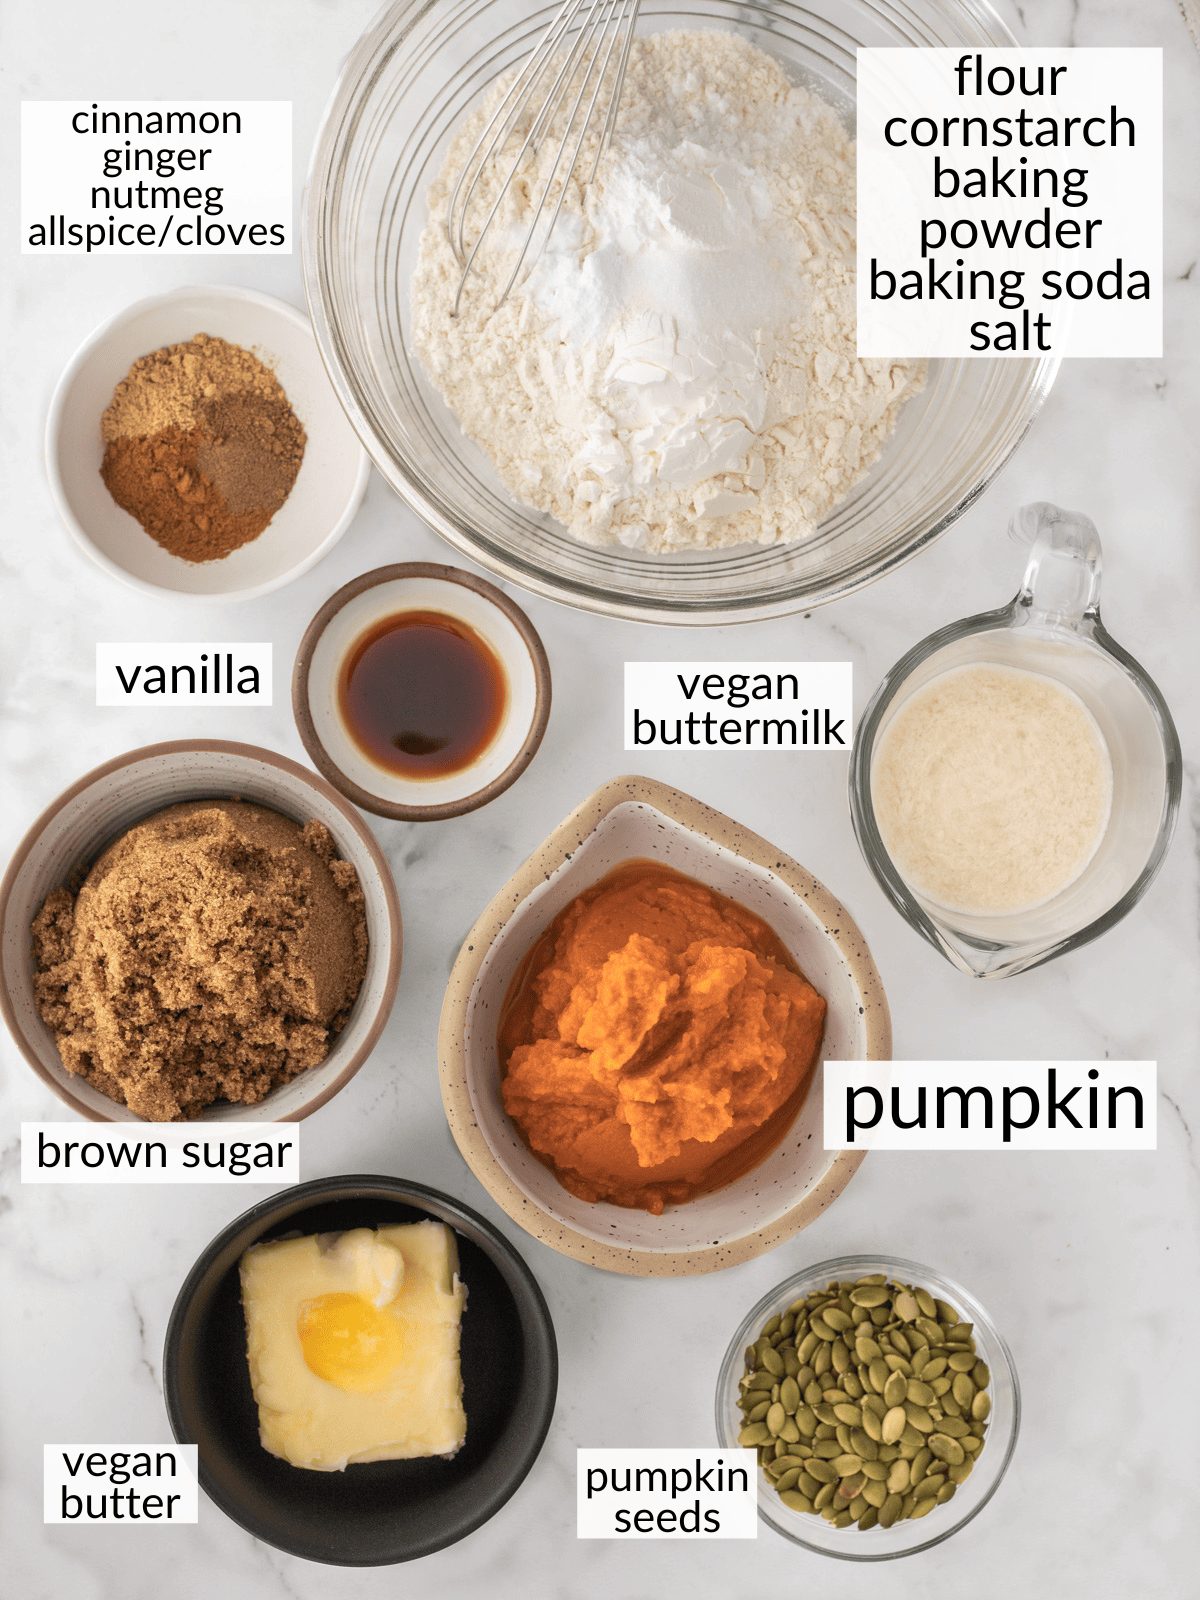 Ingredients for pumpkin muffins in individual bowls.